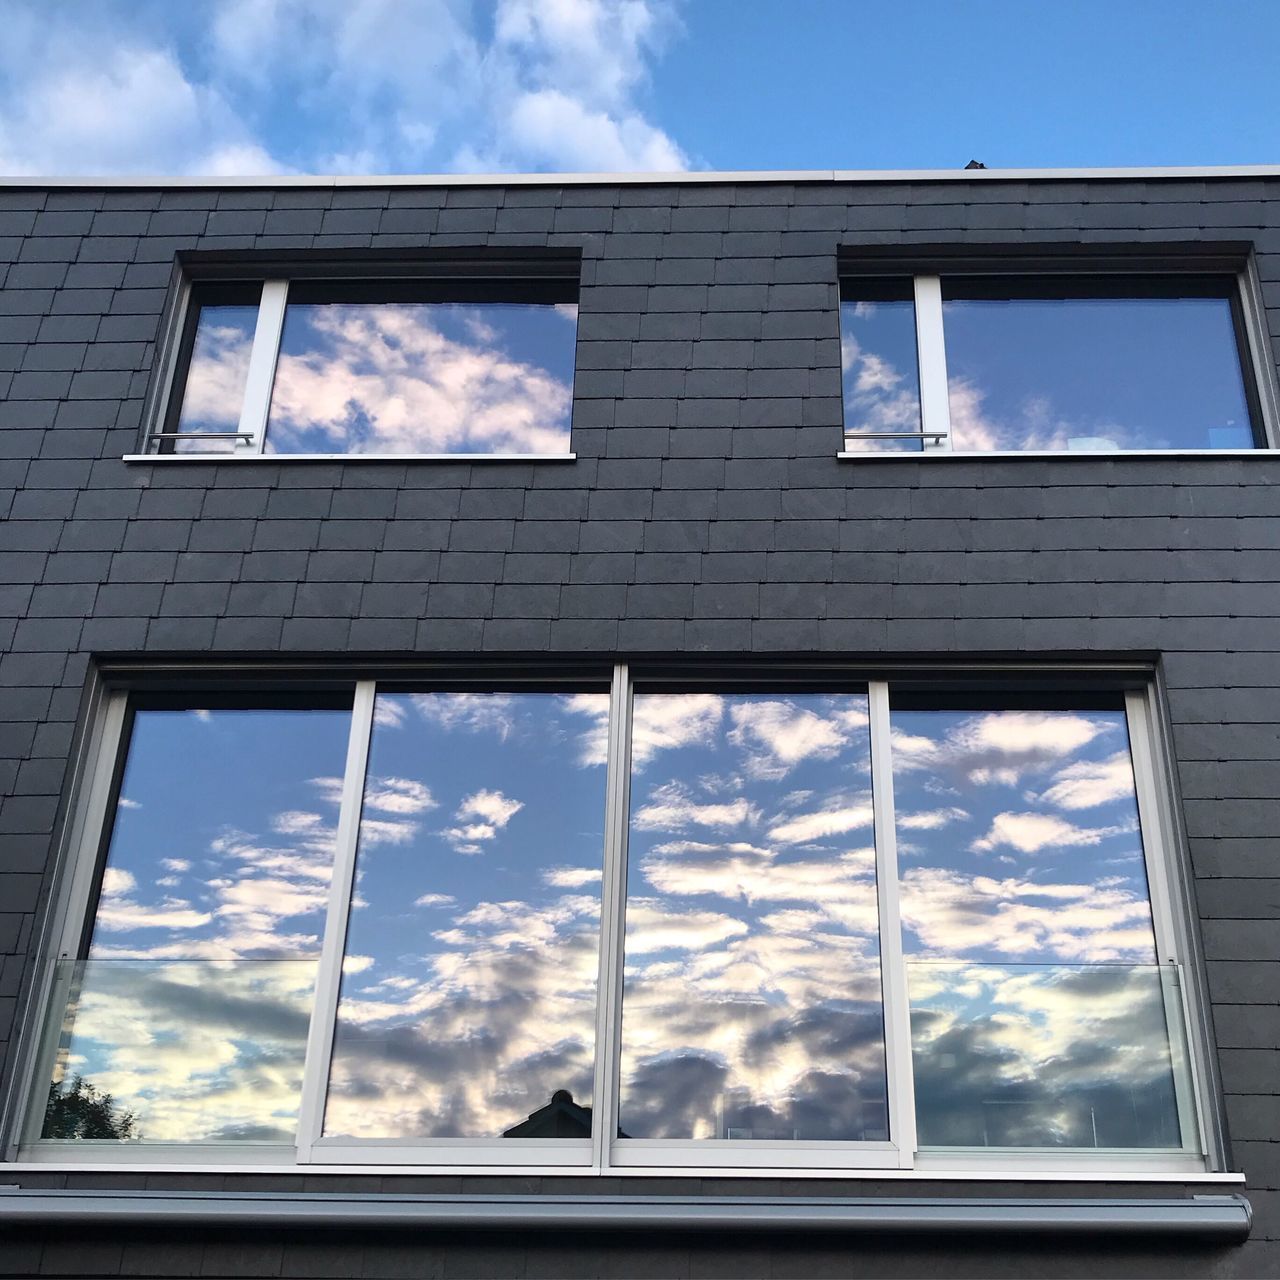 sky, window, cloud - sky, glass - material, low angle view, built structure, architecture, building exterior, building, no people, reflection, nature, transparent, day, outdoors, house, sunlight, glass, blue, window frame